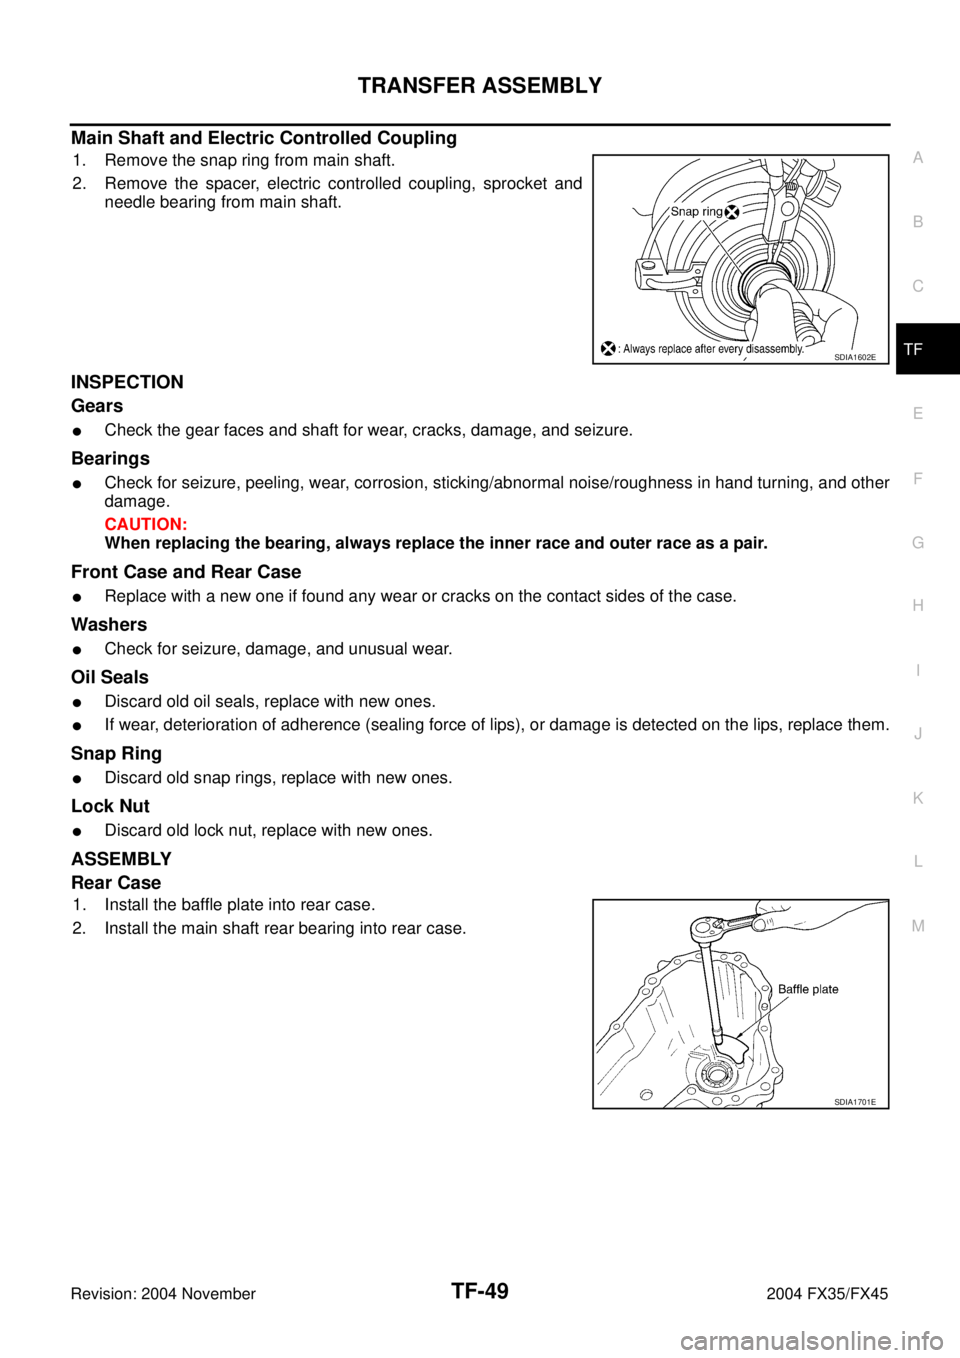 INFINITI FX35 2004  Service Manual TRANSFER ASSEMBLY
TF-49
C
E
F
G
H
I
J
K
L
MA
B
TF
Revision: 2004 November 2004 FX35/FX45
Main Shaft and Electric Controlled Coupling
1. Remove the snap ring from main shaft.
2. Remove the spacer, elec